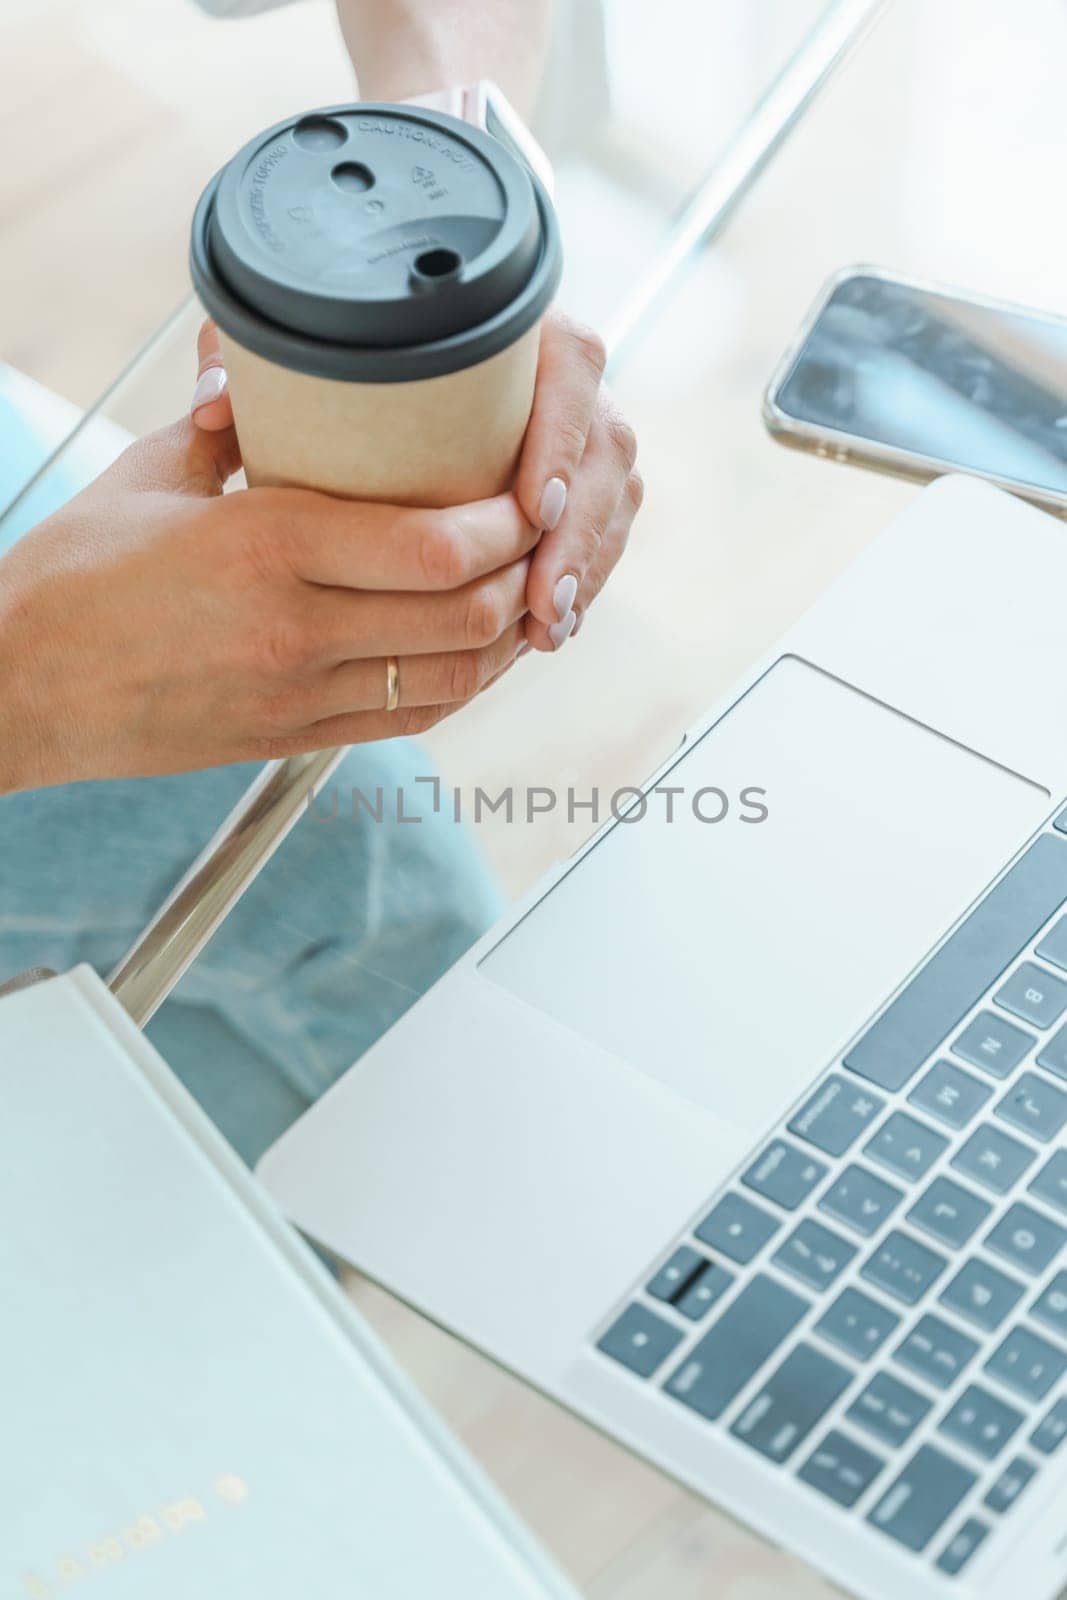 Hands typing on a computer keyboard over a white office table with a cup of coffee and supplies, top view